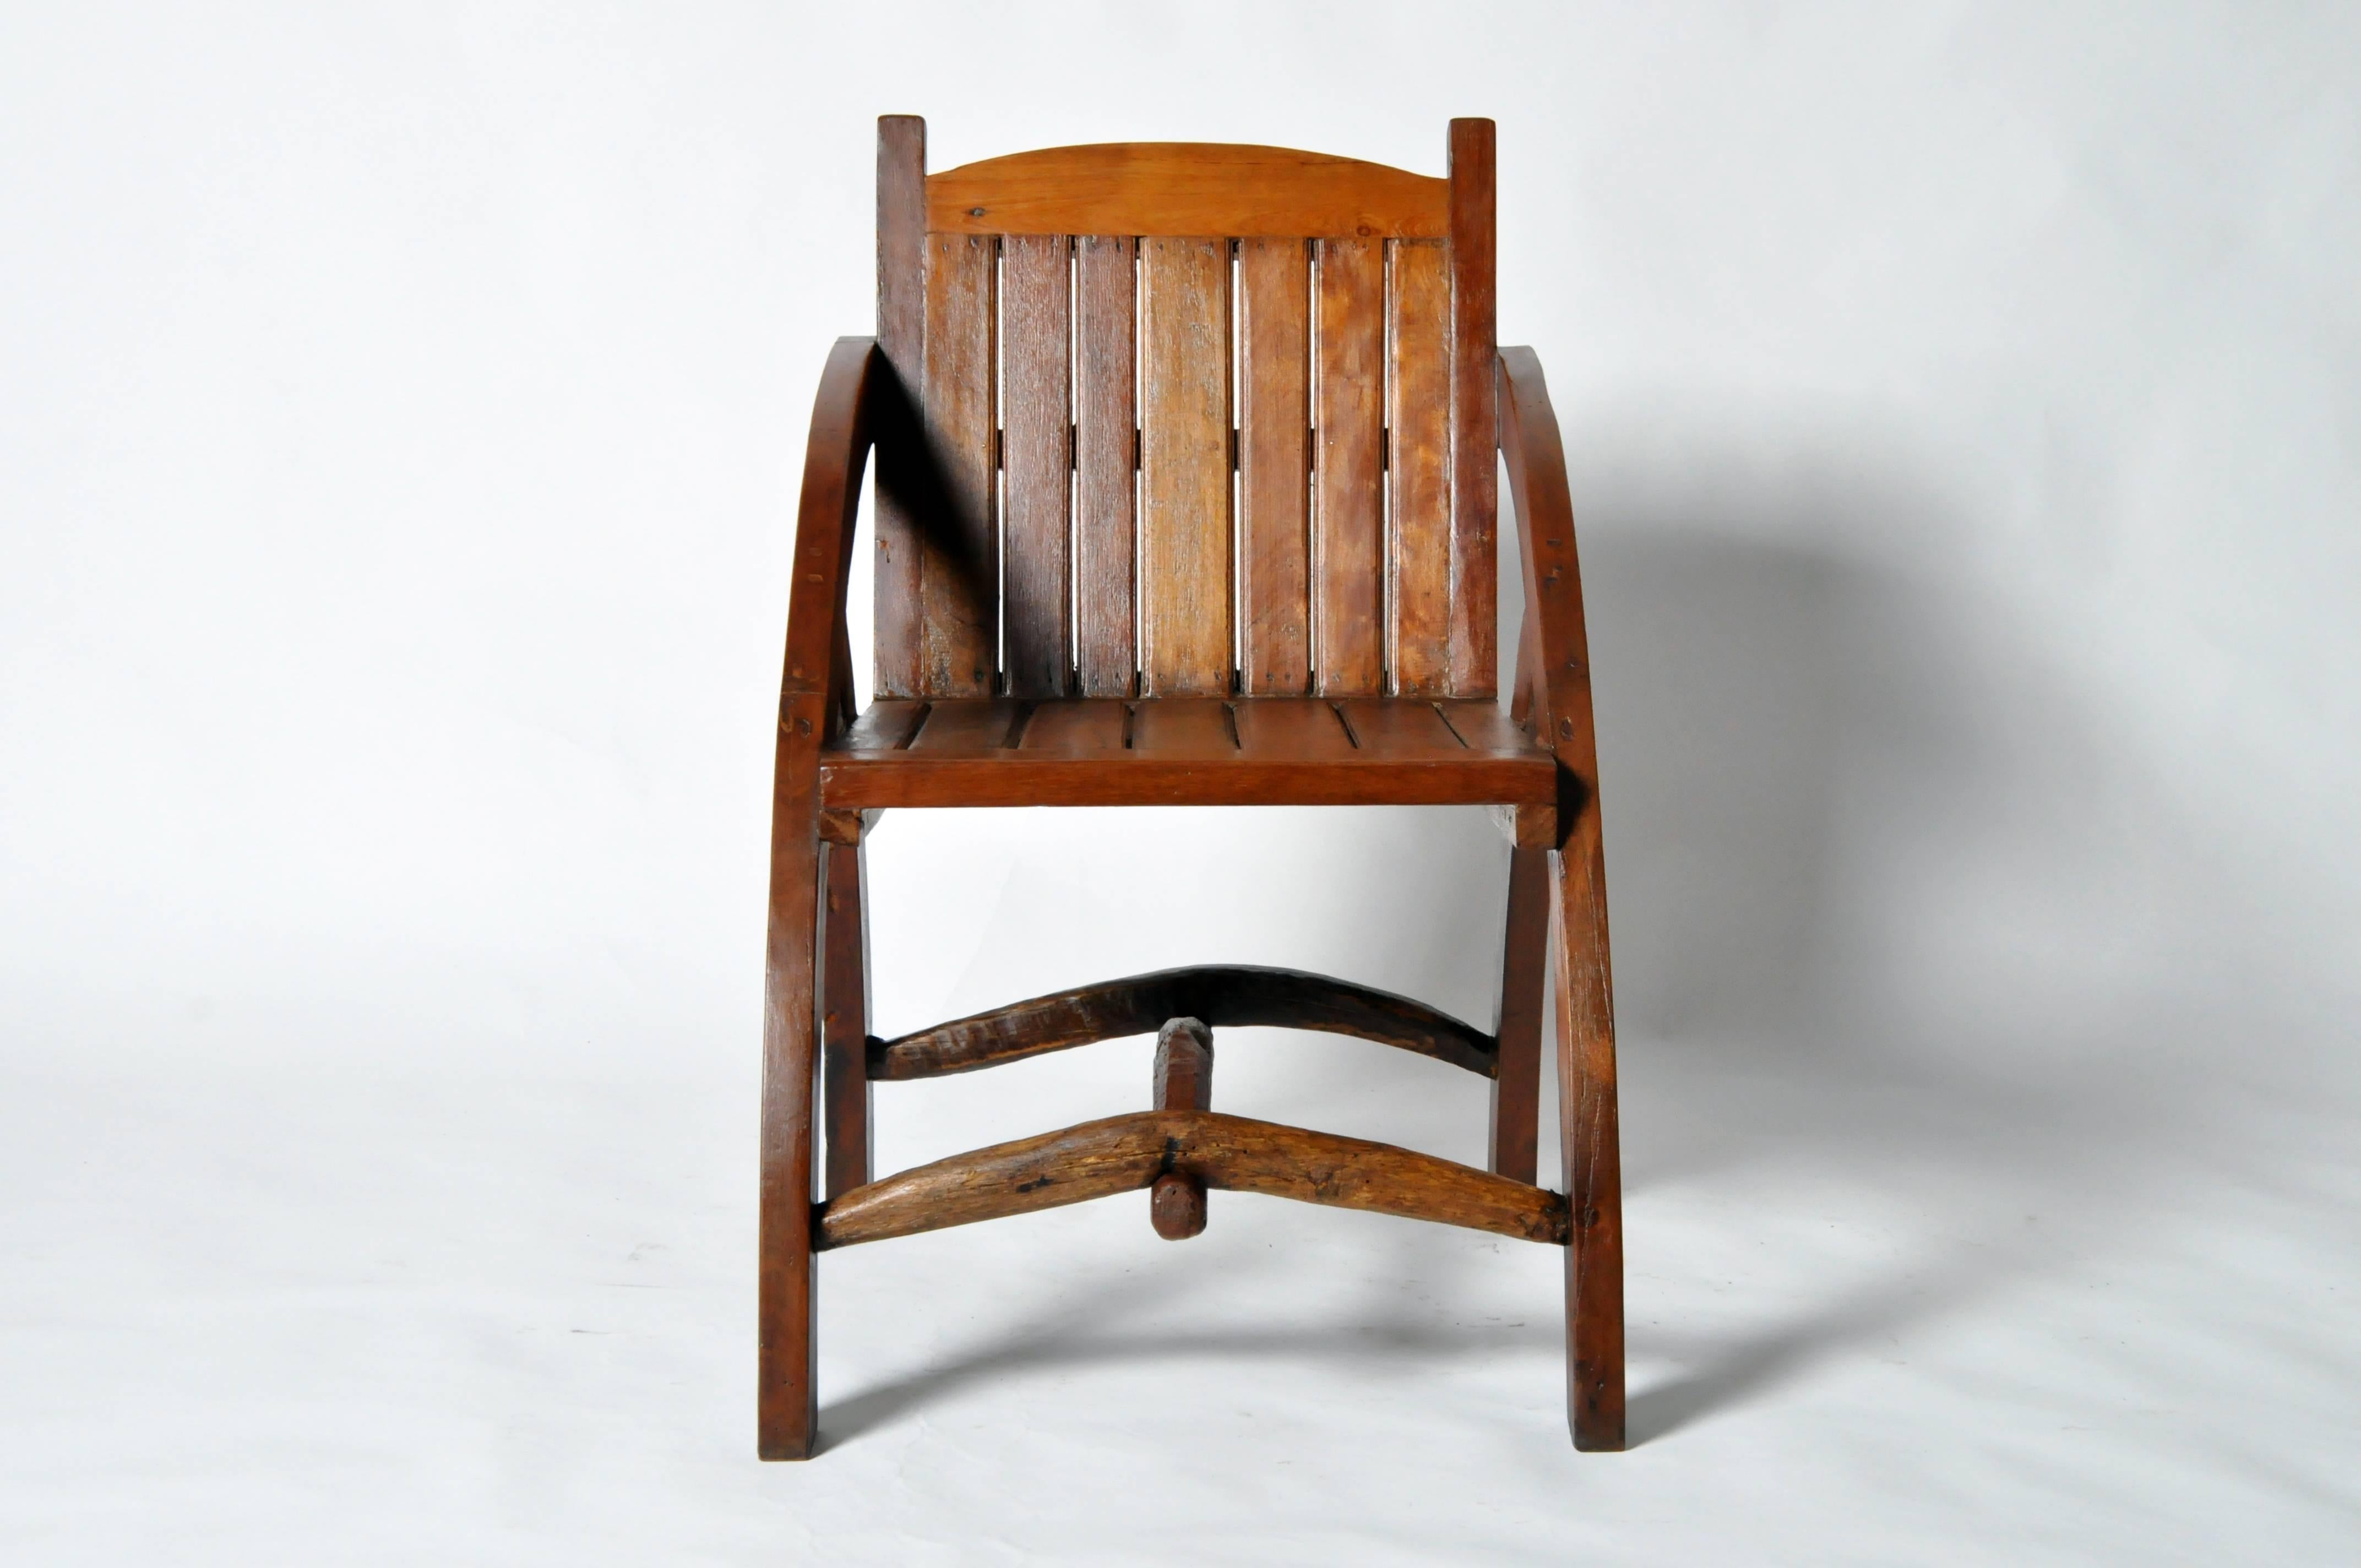 This handsome rustic chair is from Chiangmai, Thailand and was made from reclaimed teakwood. It features curved arms and is comfortable and sturdy.